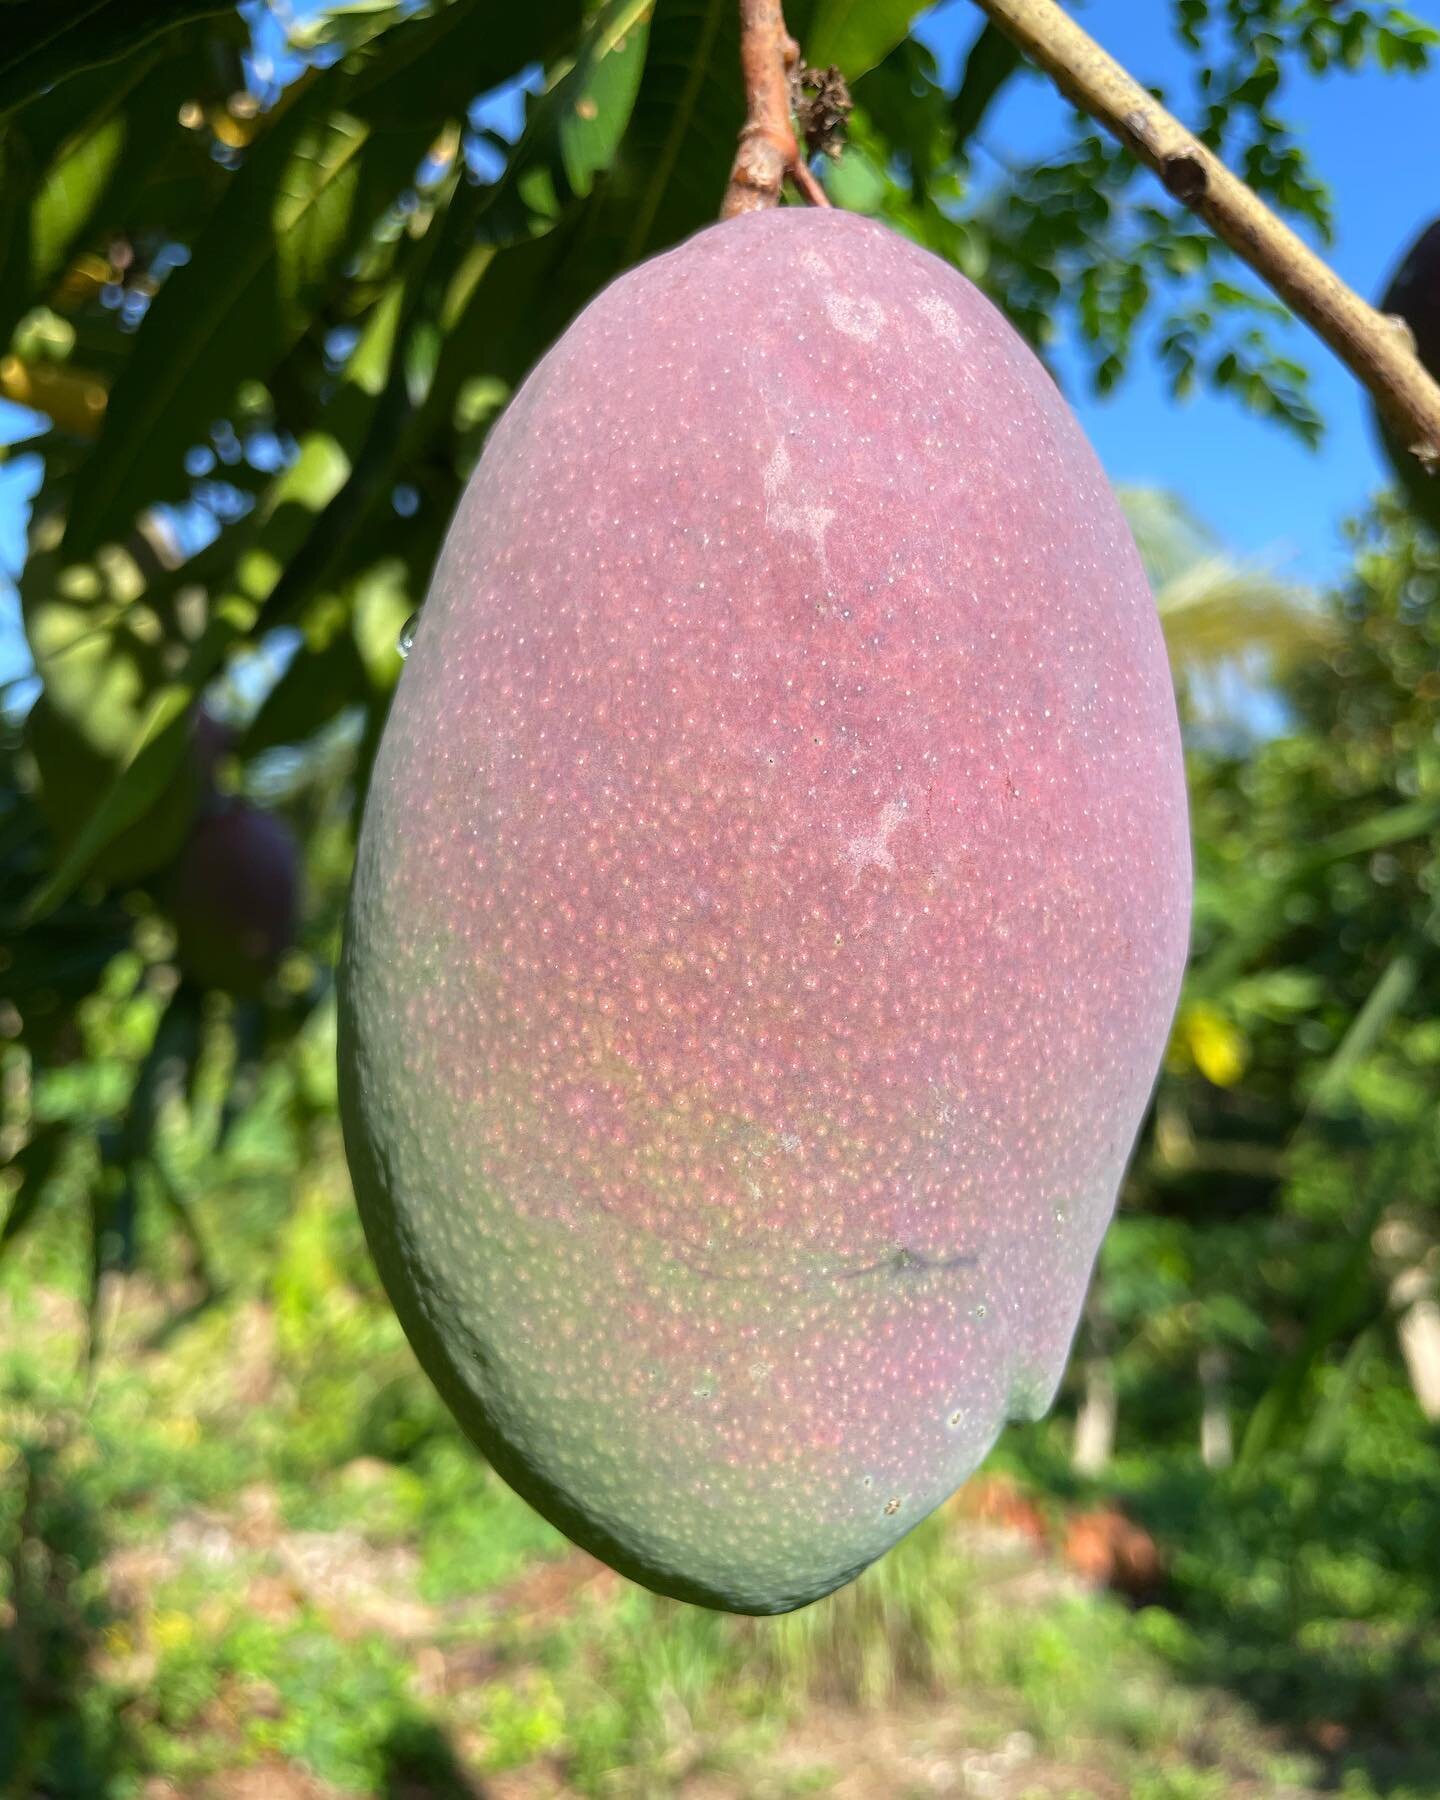 Mango 🥭 season is right around the corner! 🤤 if you like to try our selection of tropical fruit this summer you can check out our ELFS program to receive a box of fruit and fruit eggs every 2 or 4 weeks throughout the summer - link in bio 🙏